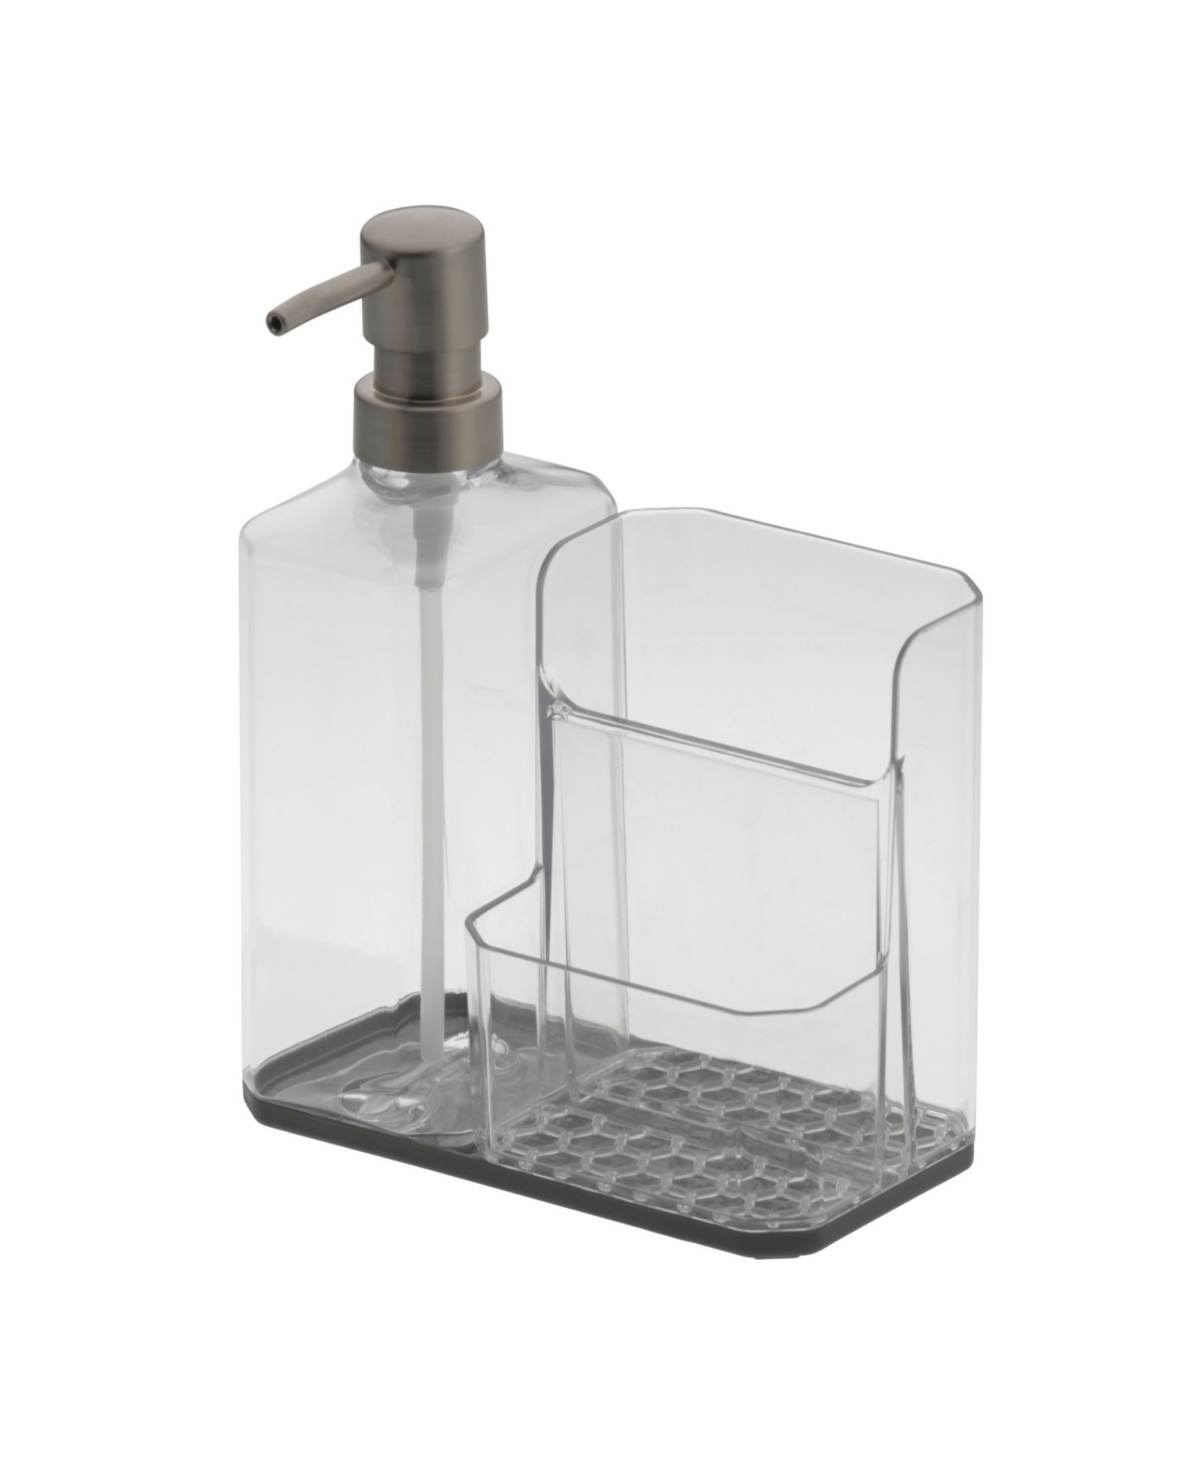 Spectrum Diversified Hexa Sponge Brush Holder With Soap Pump In Clear And Dark Gray